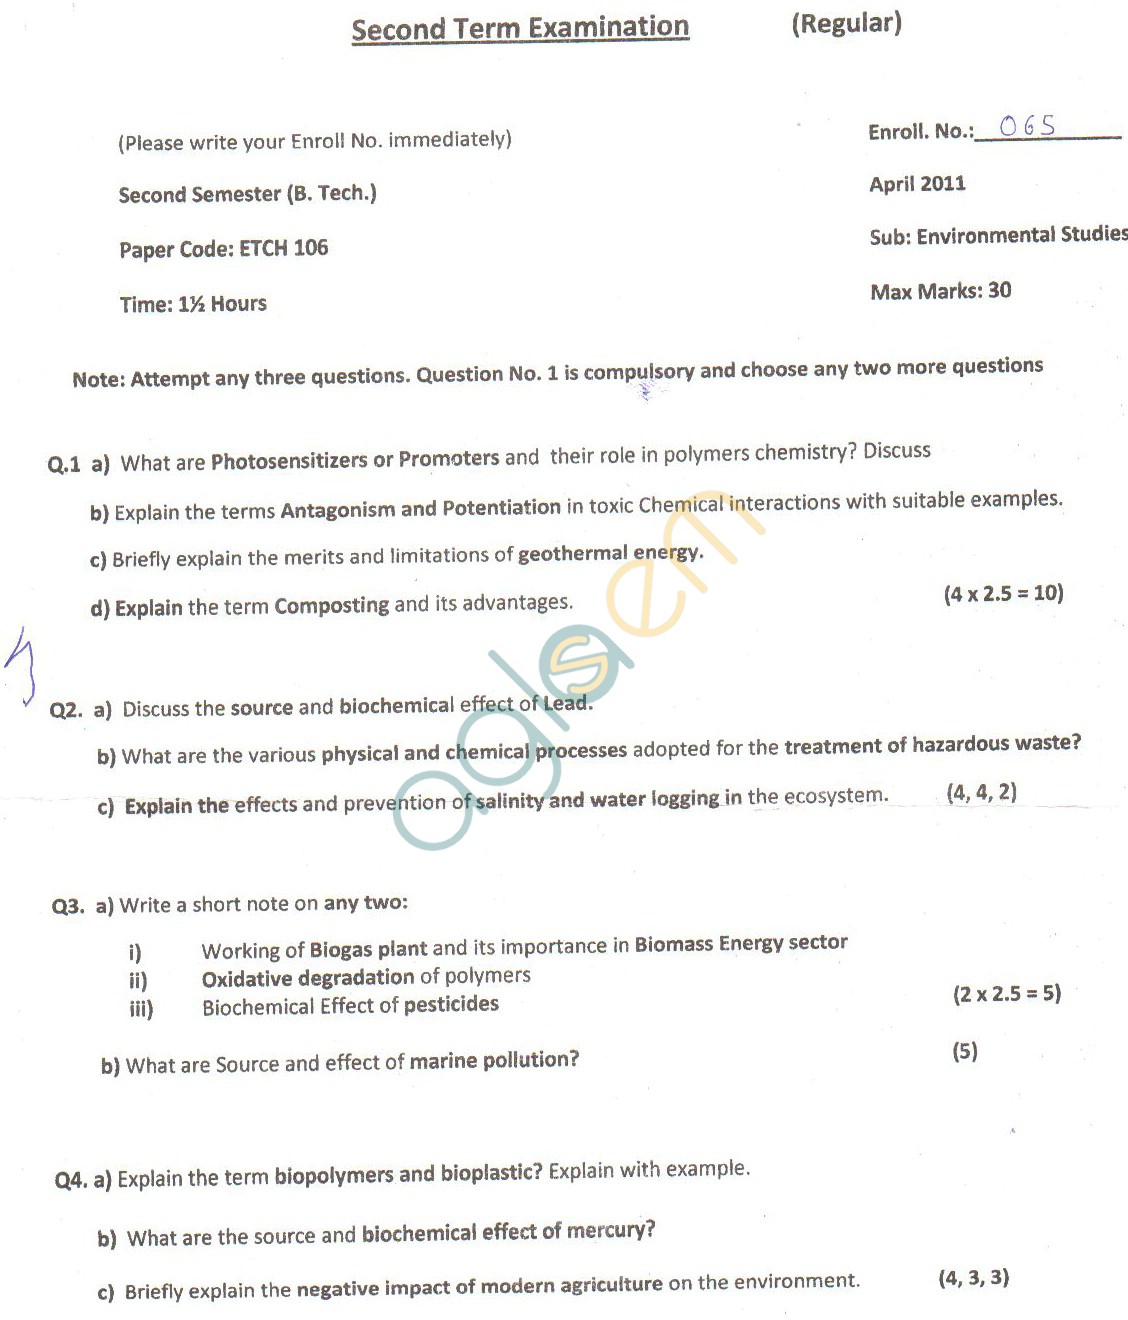 GGSIPU Question Papers Second Semester – Second Term 2011 – ETCH-106